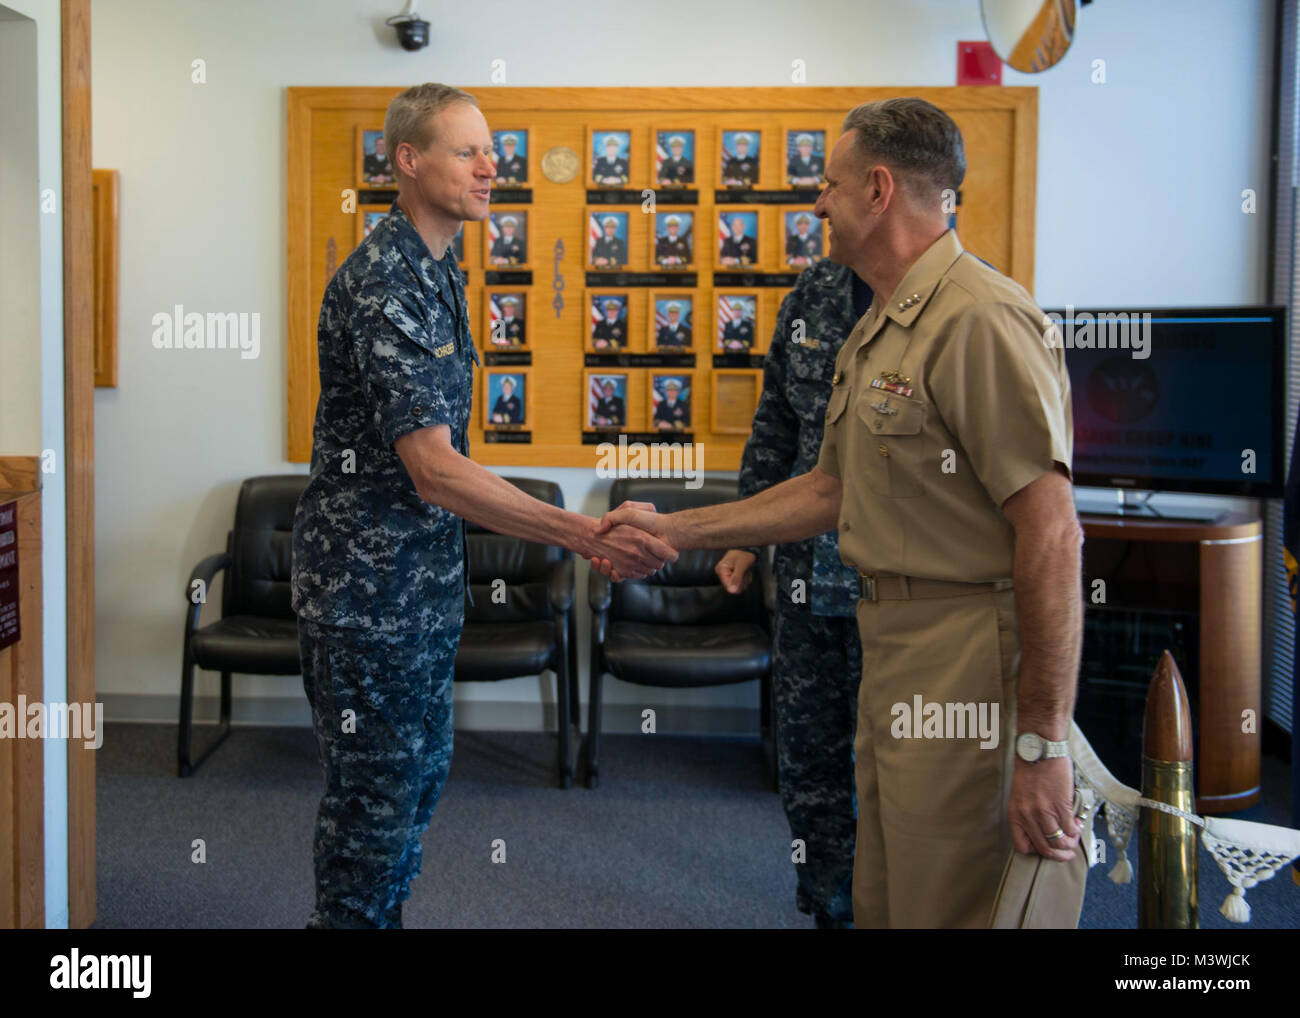 BANGOR, Wash. (June 22, 2017) Capt. Ted Schroeder, chief of staff, Submarine Group (COMSUBGRU) 9, greets Chief of Naval Personnel Vice Adm. Robert Burke on the quarterdeck of COMSUBGRU-9 while visiting Naval Base Kitsap (NBK) Bangor. During his visit, he conducted four separate all hands calls at NBK Bangor and NBK Bremerton to answer Sailor’s questions. (U.S. Navy photo by Mass Communication Specialist 1st Class Amanda R. Gray/Released) 170622-N-UD469-011 by Naval Base Kitsap (NBK) Stock Photo